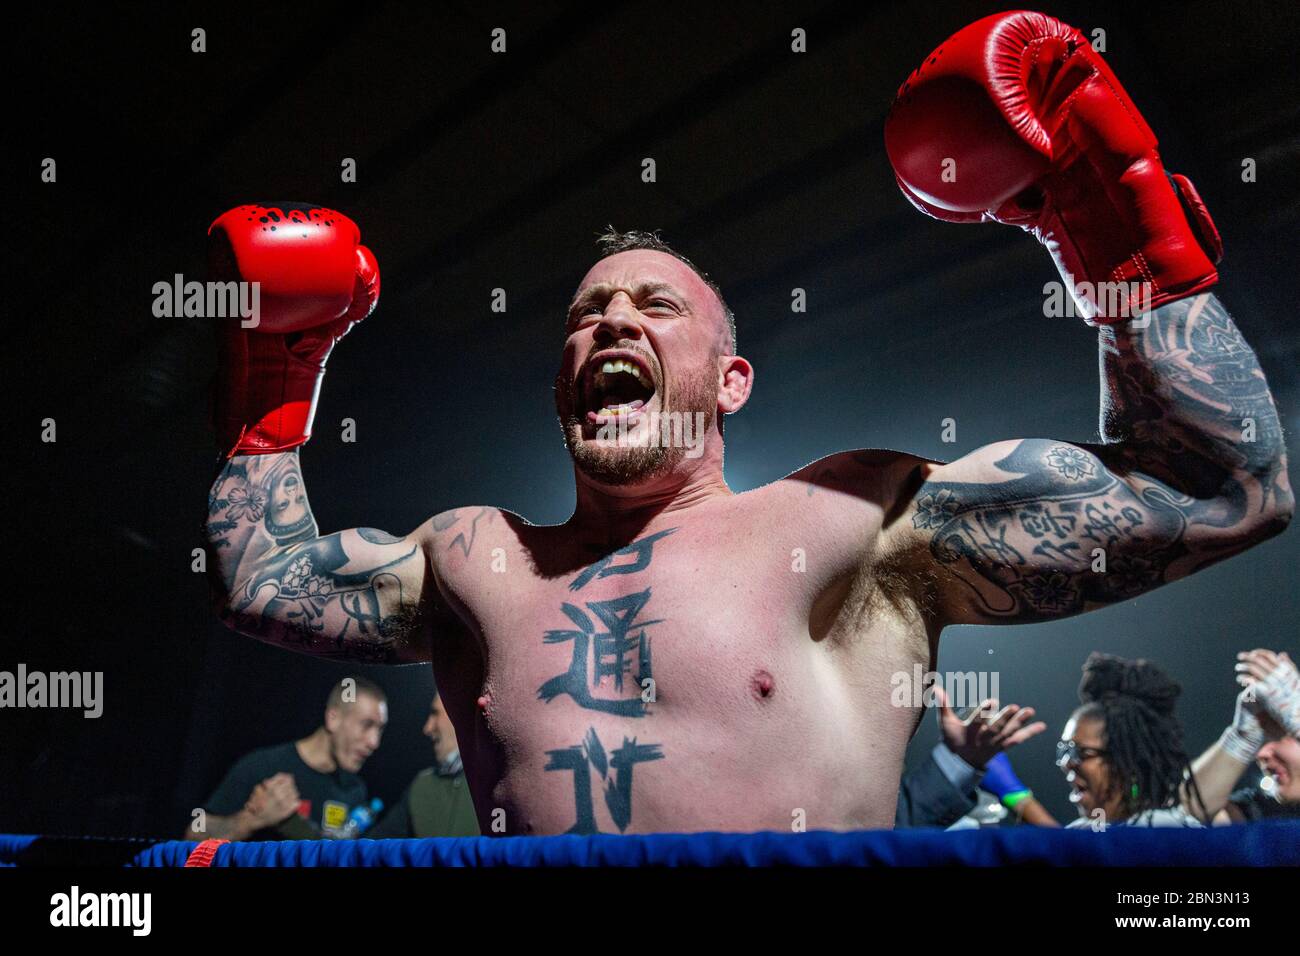 MANCHESTER, UK. 07 Dec 2018. Boxer Ian Butlin celebrates after a TKO in match 12 of KO Promotions Christmas Cracker boxing event at Bowlers Exhibition. Stock Photo